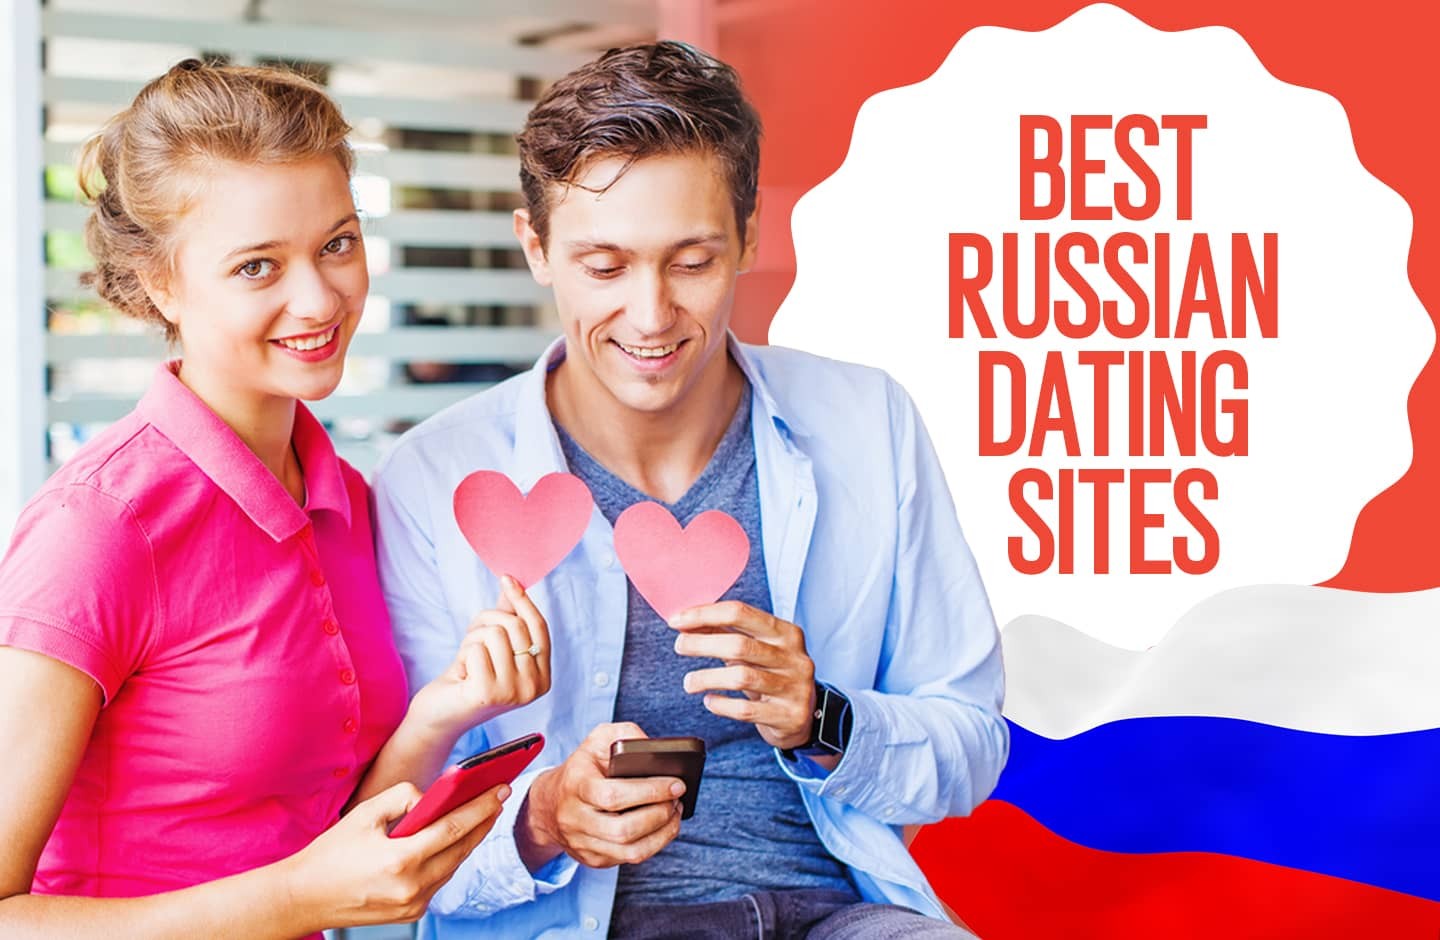 Top List of Russian Dating Sites